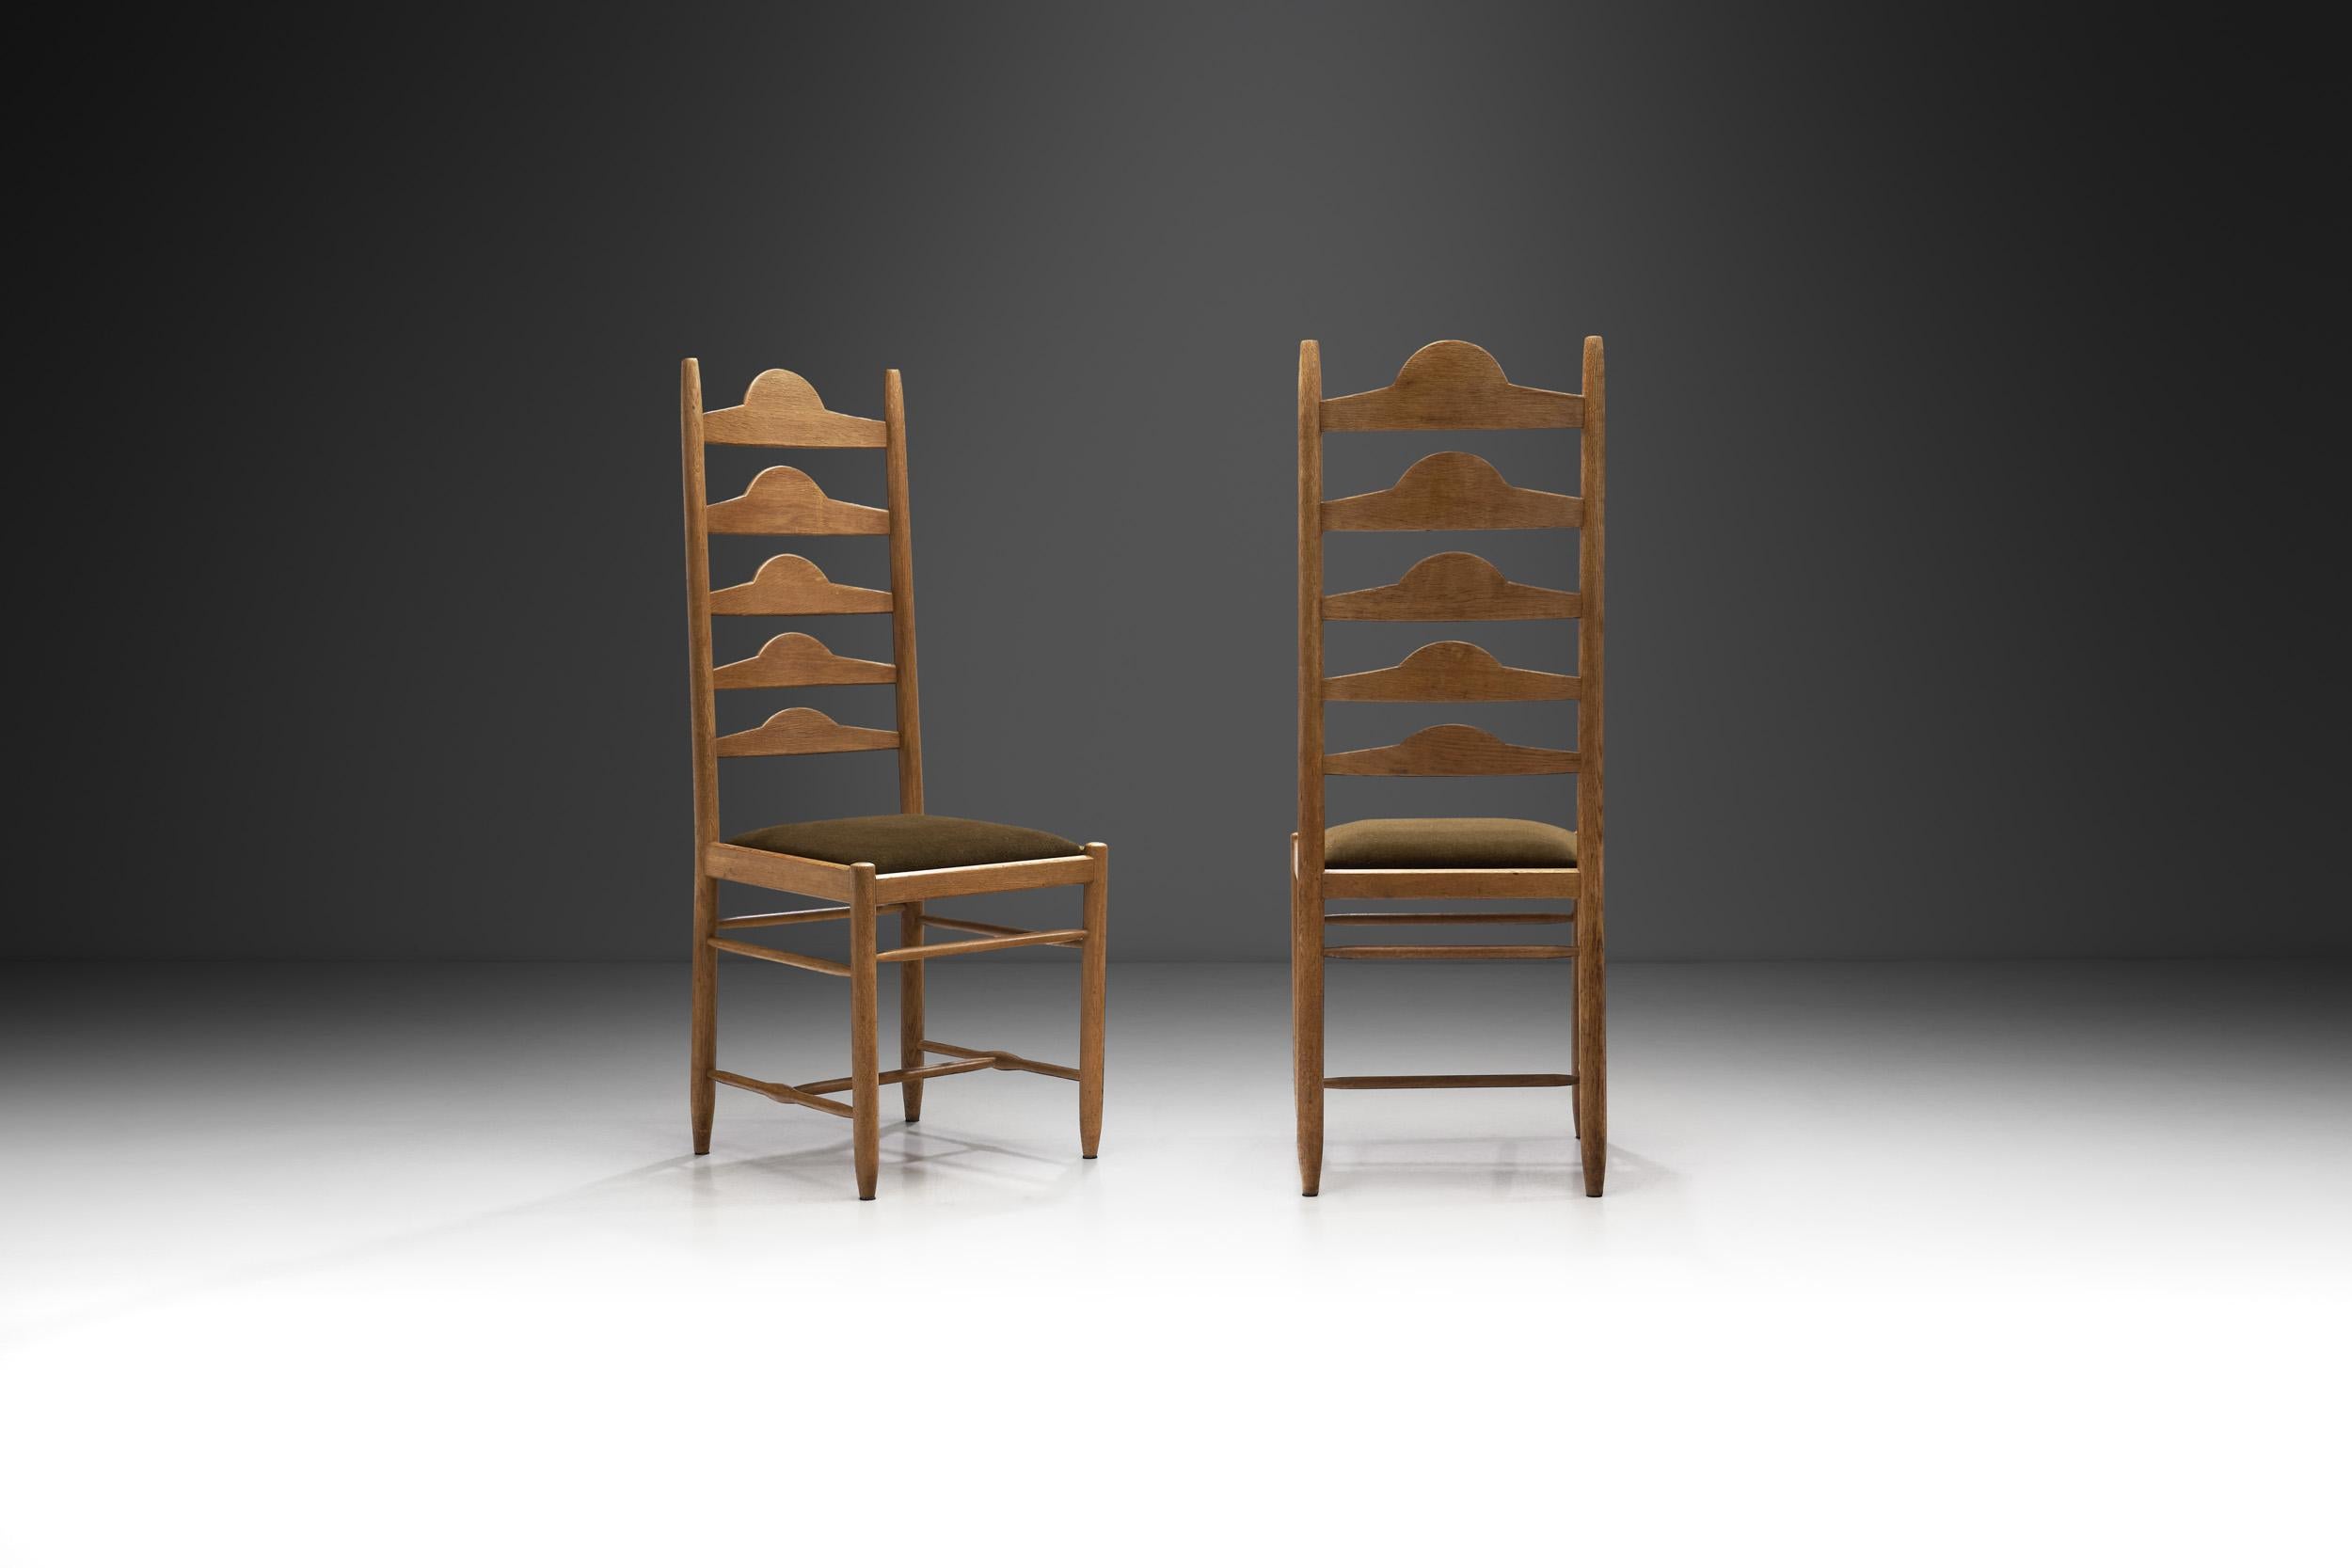 Modern Sculptural Ladder-Back Chairs, Europe first half of the 20th century For Sale